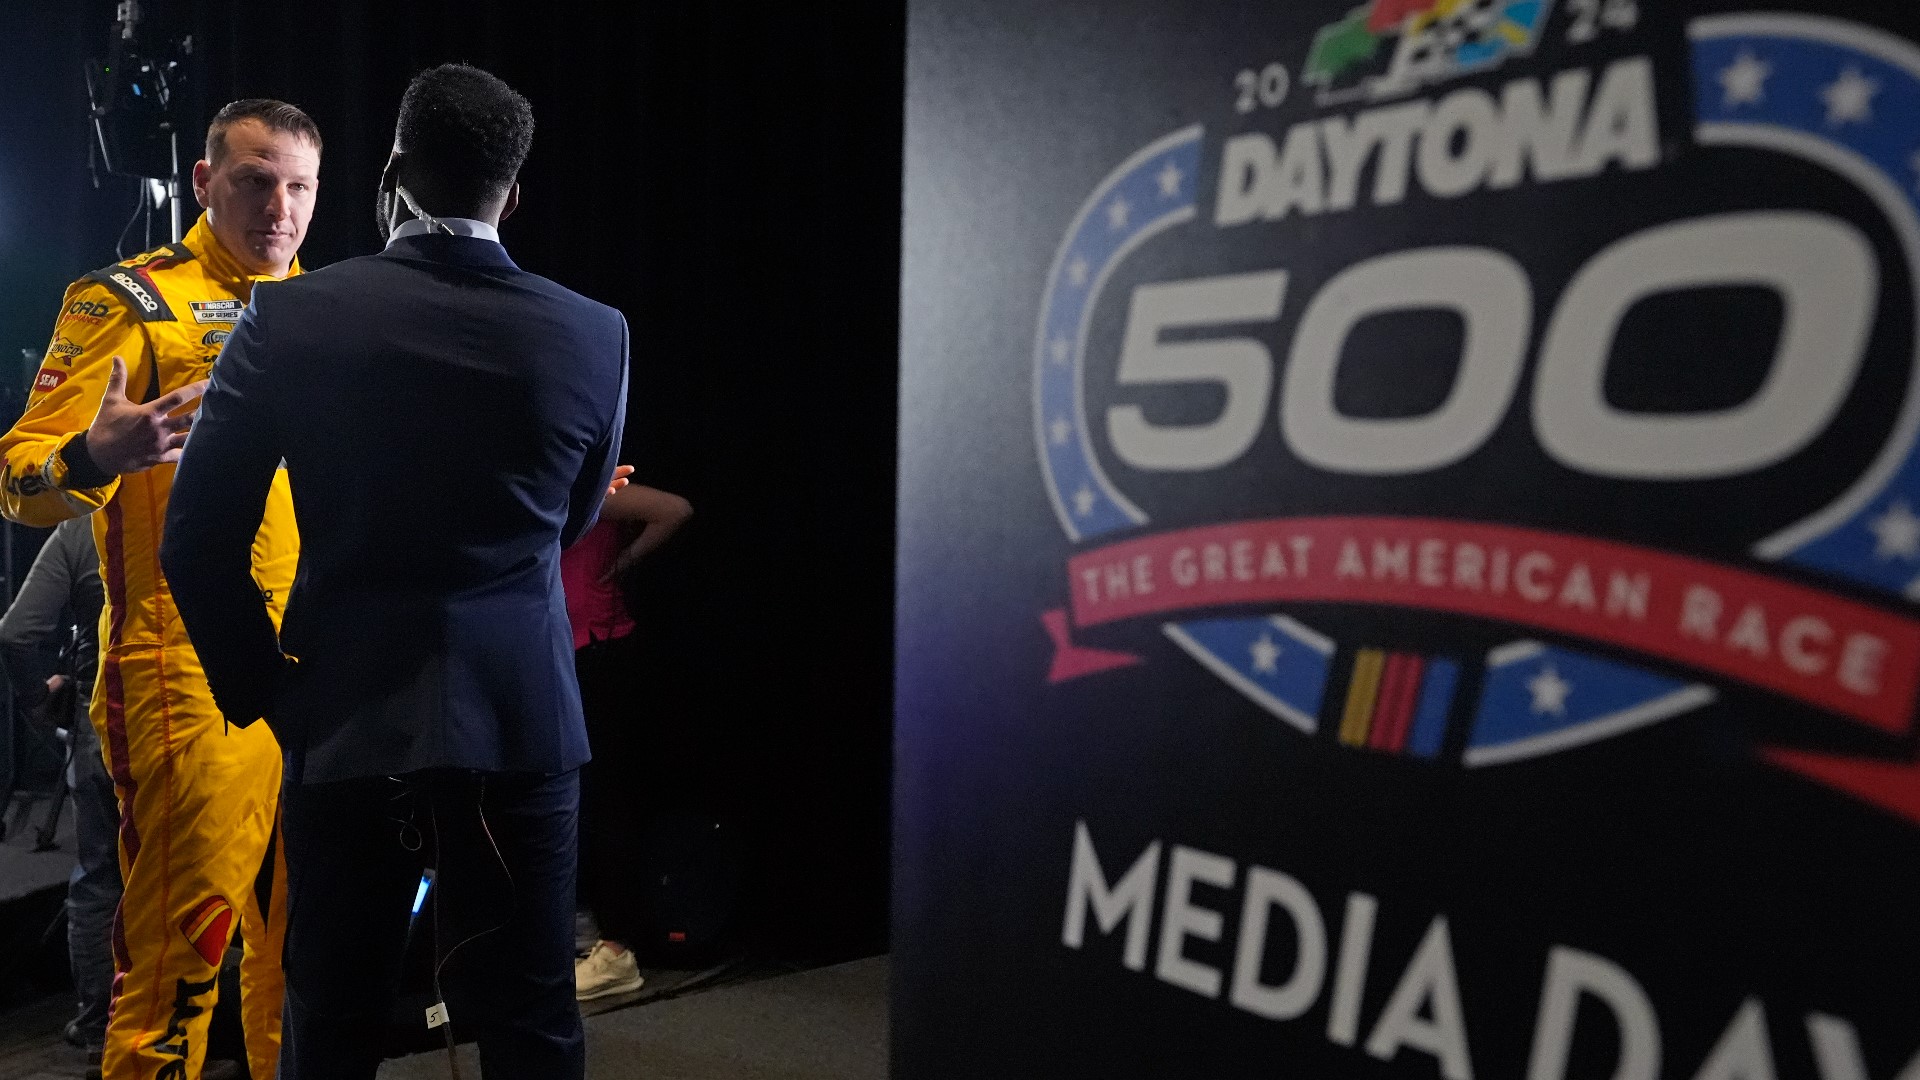 NASCAR and Netflix released the docuseries on Jan. 30, 2024, leading up to the Daytona 500 and the start of the 2024 NASCAR Cup Series Season.